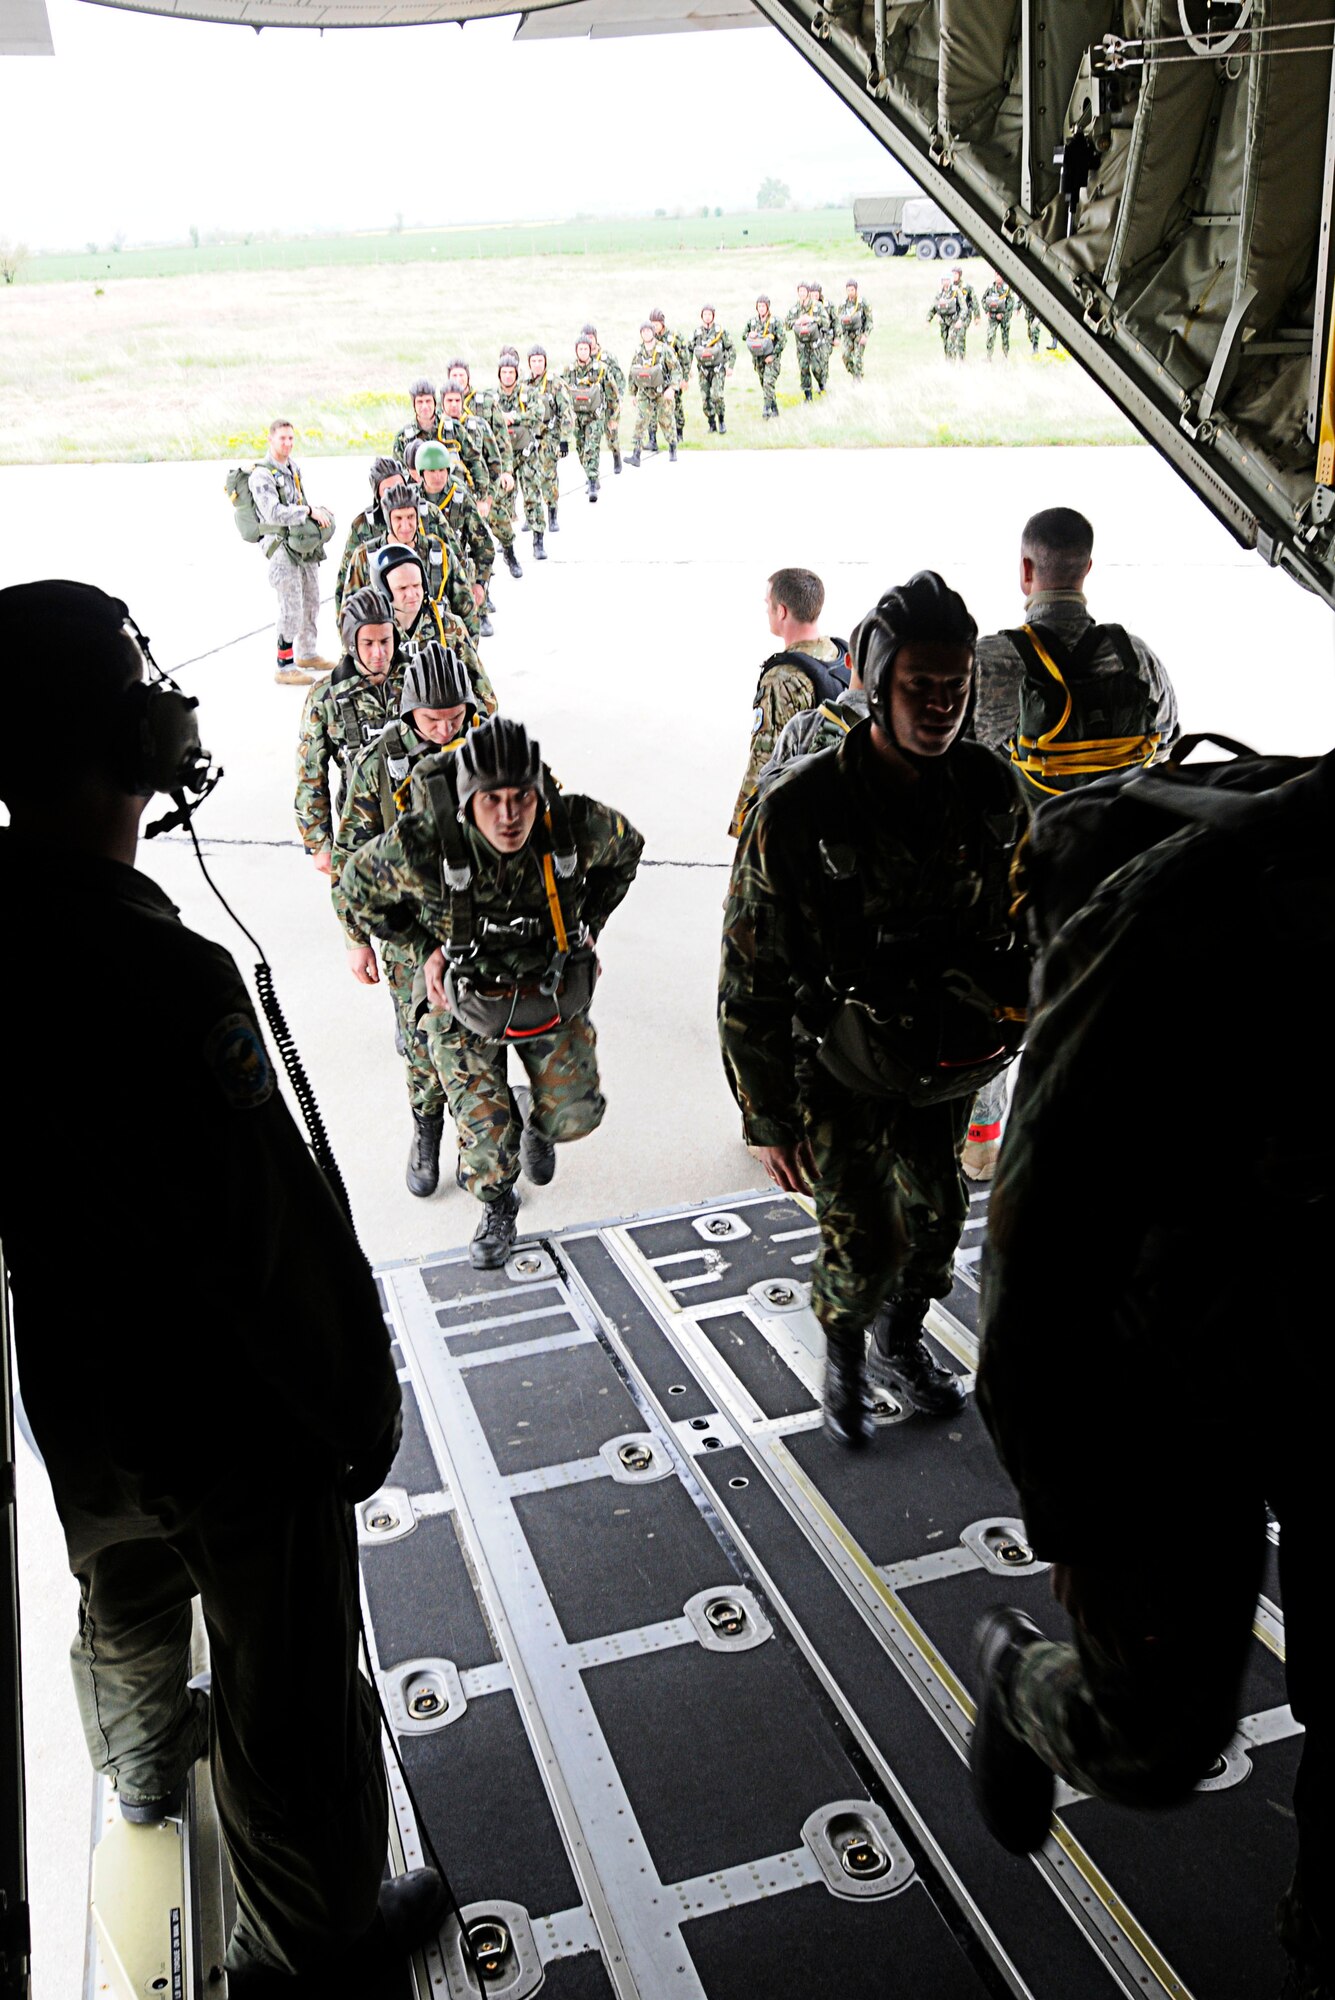 U.S. Air Force 435th Security Forces Squadron members usher in more than 50 Bulgarian Air Force paratroopers into a C-130J Super Hercules in support of Thracian Spring 2011, Plovdiv, Bulgaria, April 29, 2011. Thracian Spring 2011 is a two week on-site training designed to build partnerships between the U.S. and Bulgarian Air Force. (U.S. Air Force photo by Airman 1st Class Desiree W. Esposito)